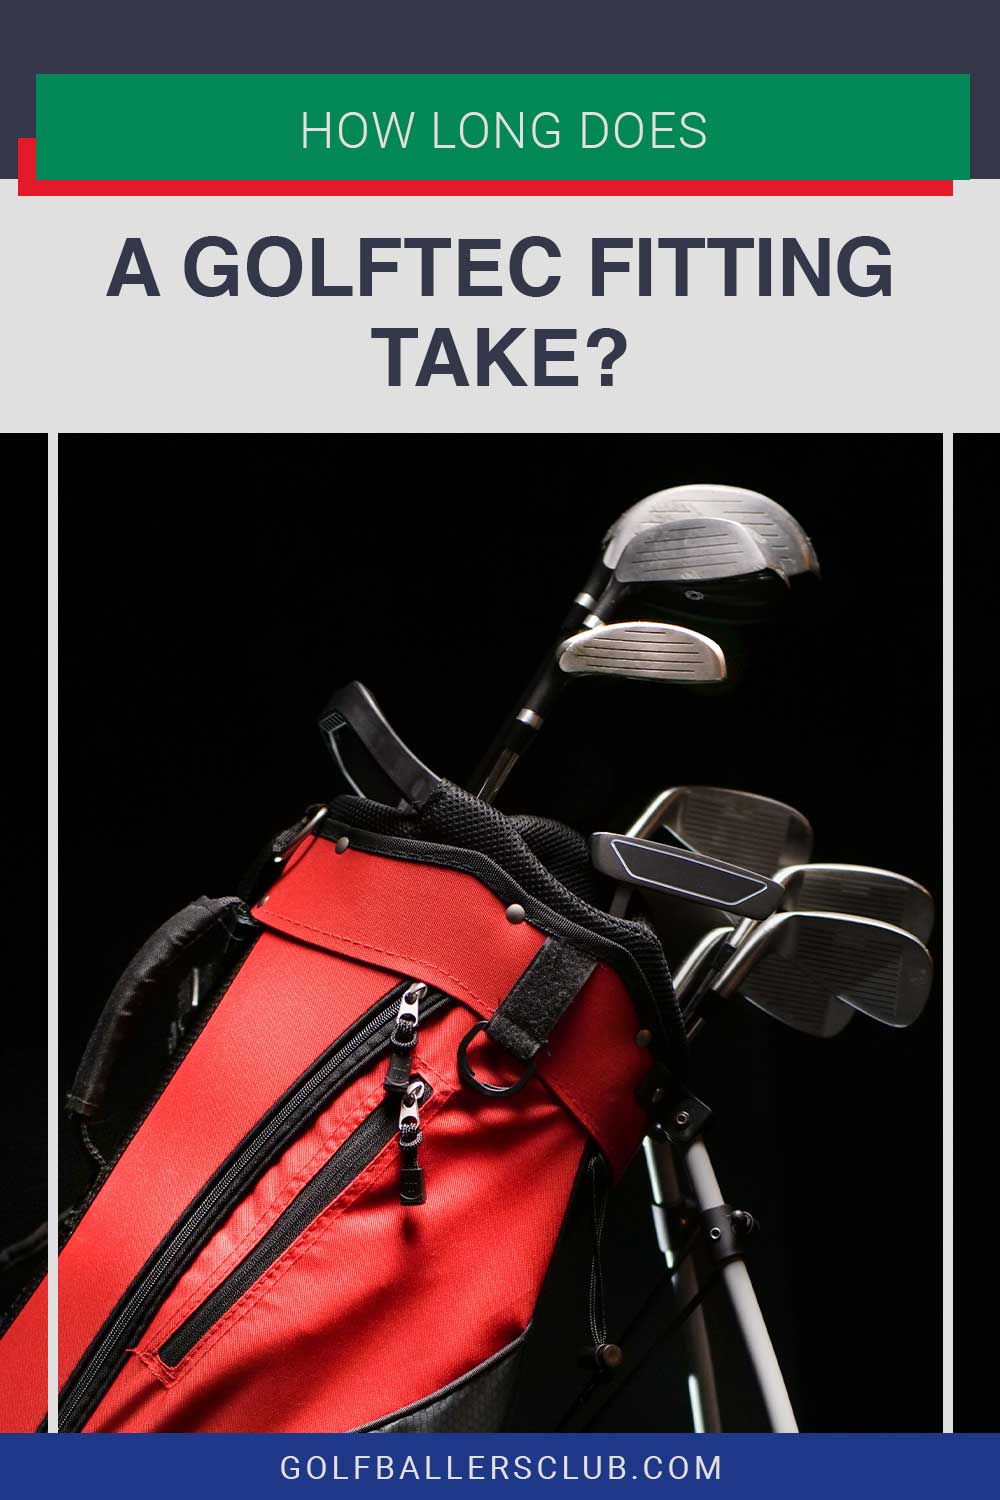 Some golf clubs and irons in a golf bag - How Long Does A GOLFTEC Fitting Take?